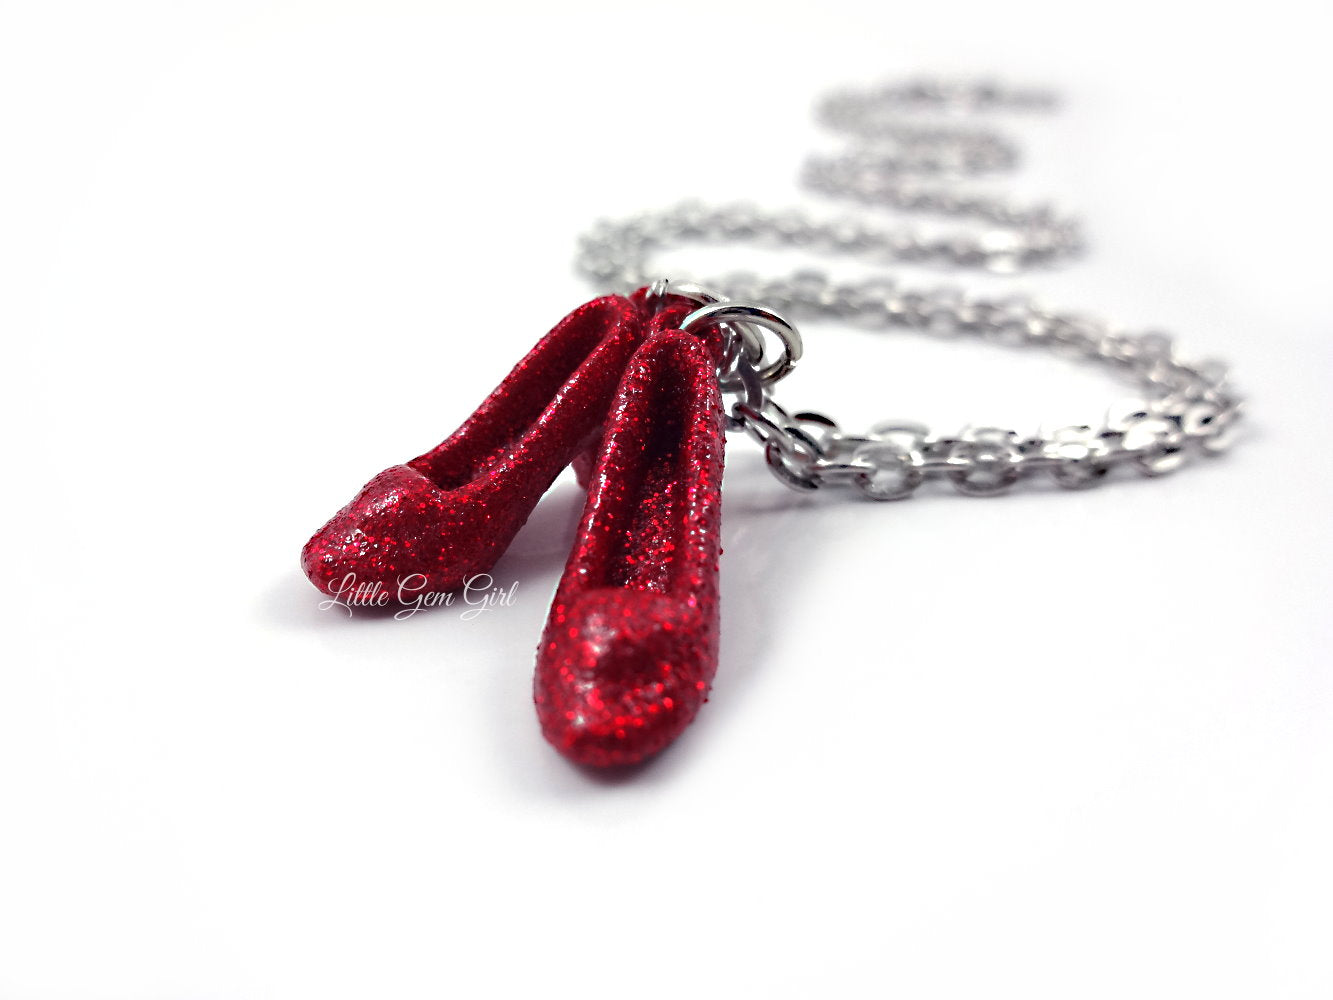 The Wonderful Wizard of Oz Red Shoe Charm Necklace - Dorothy's Ruby Red Slipper Charm Necklace